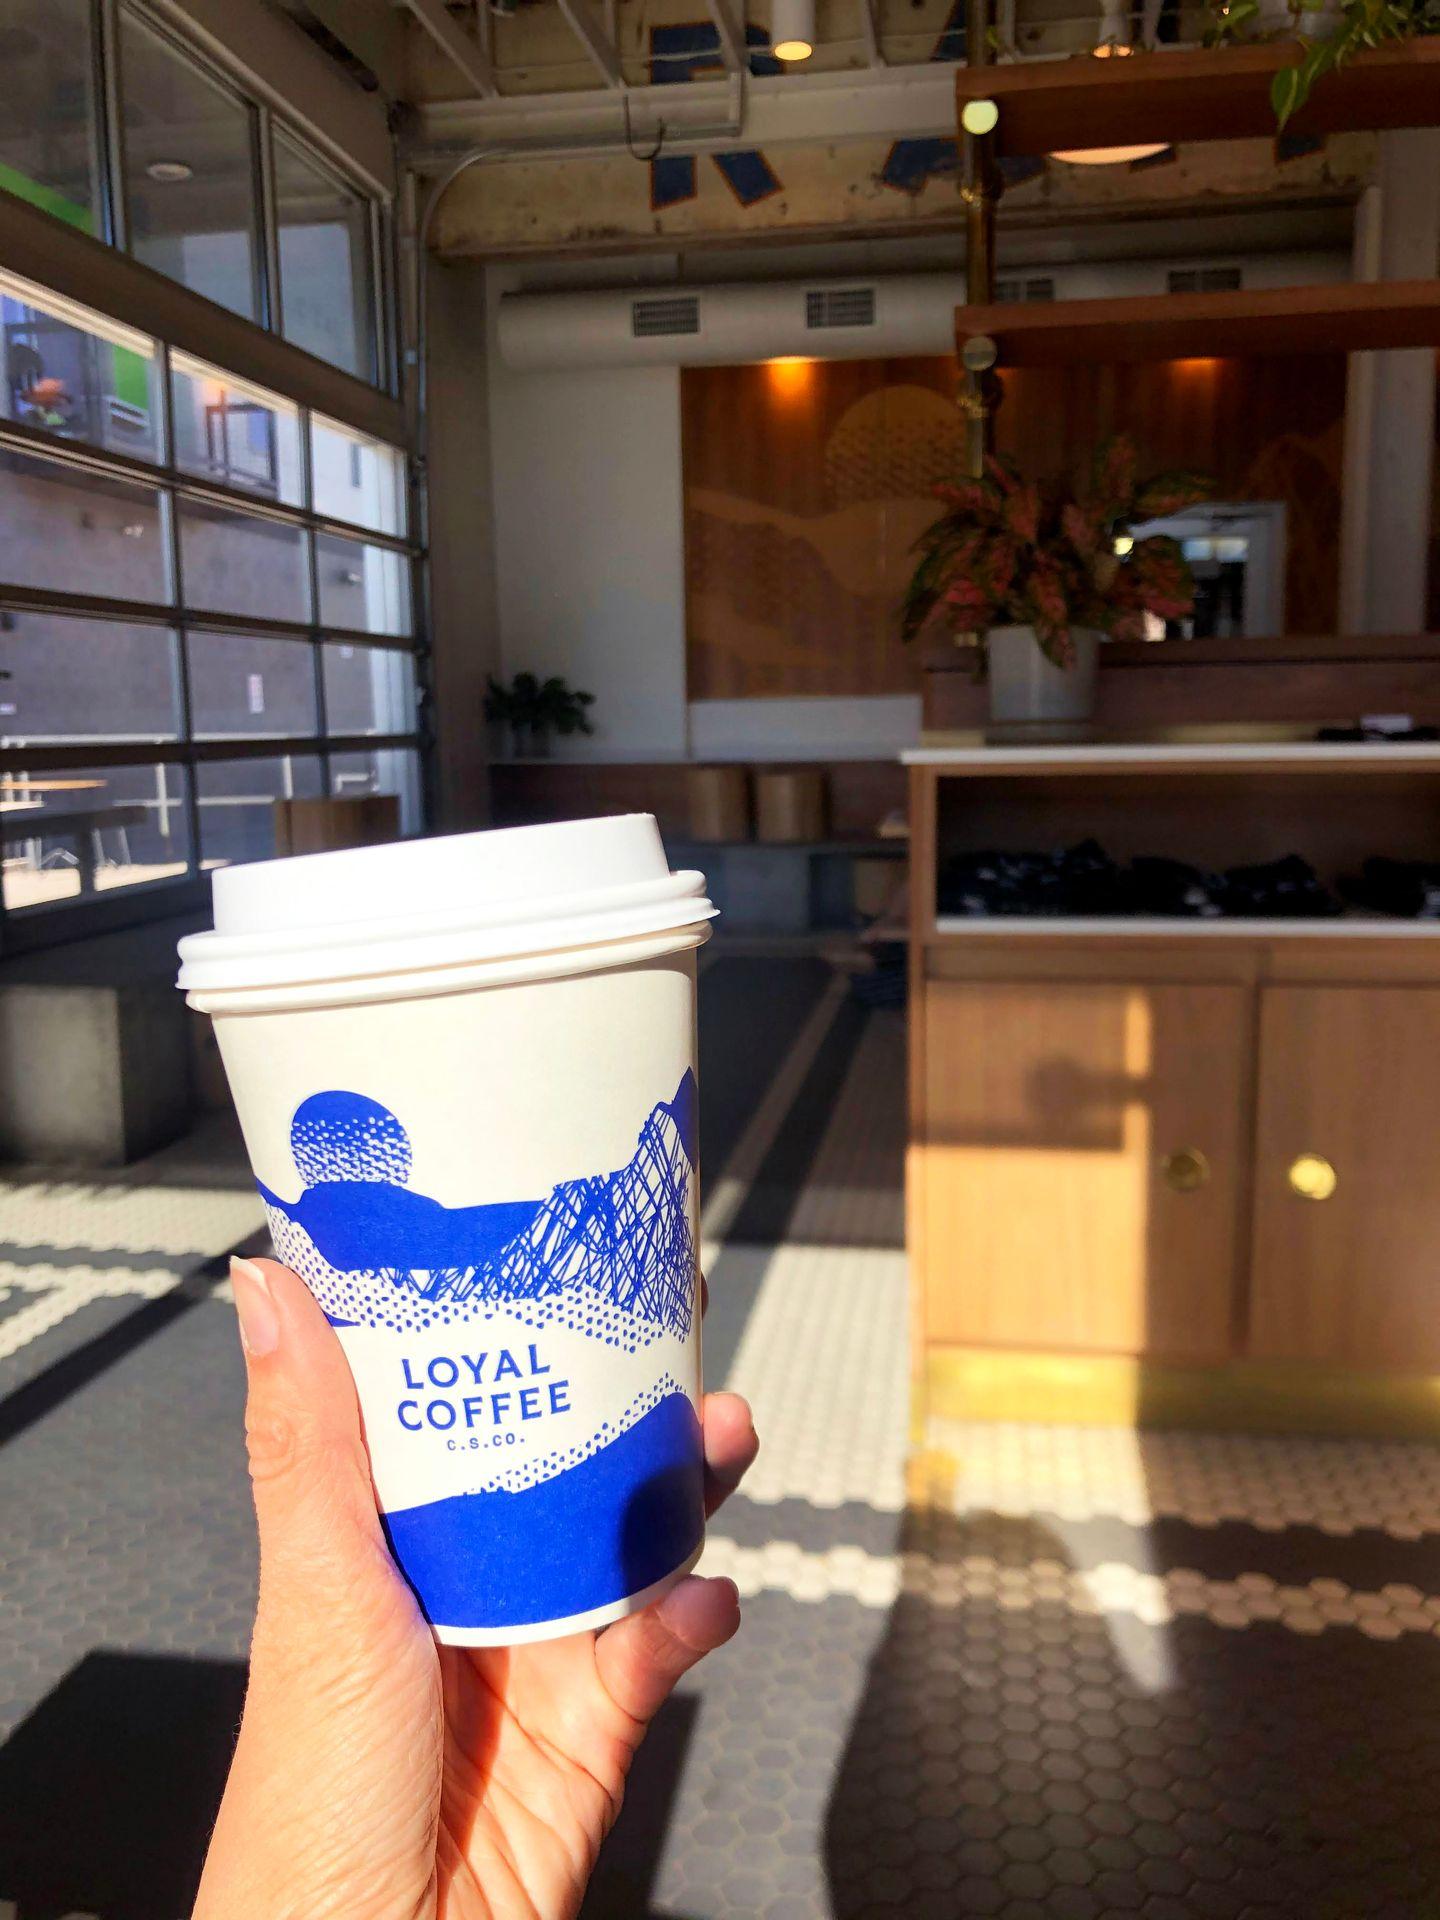 Holding up a to go cup of coffee inside of Loyal Coffee. The coffee mug has a blue and white landscape design.